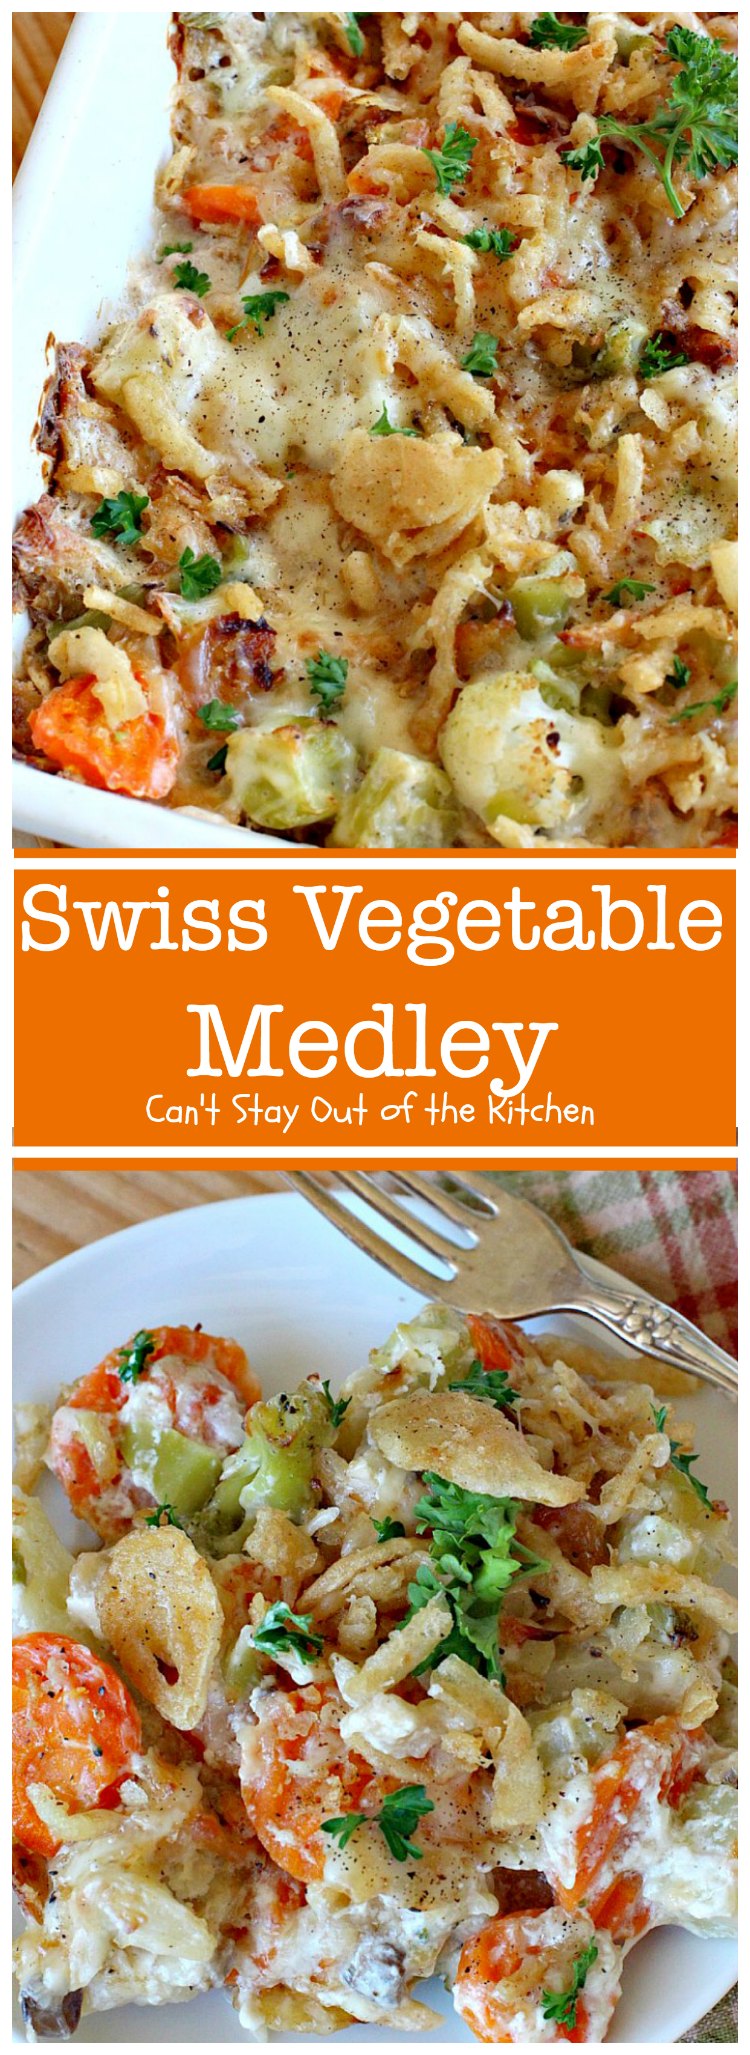 Swiss Vegetable Medley | Can't Stay Out of the Kitchen | fabulous #casserole is great for the #holidays. Uses #SwissCheese #FrenchFriedOnions & cream of mushroom soup. #vegetables